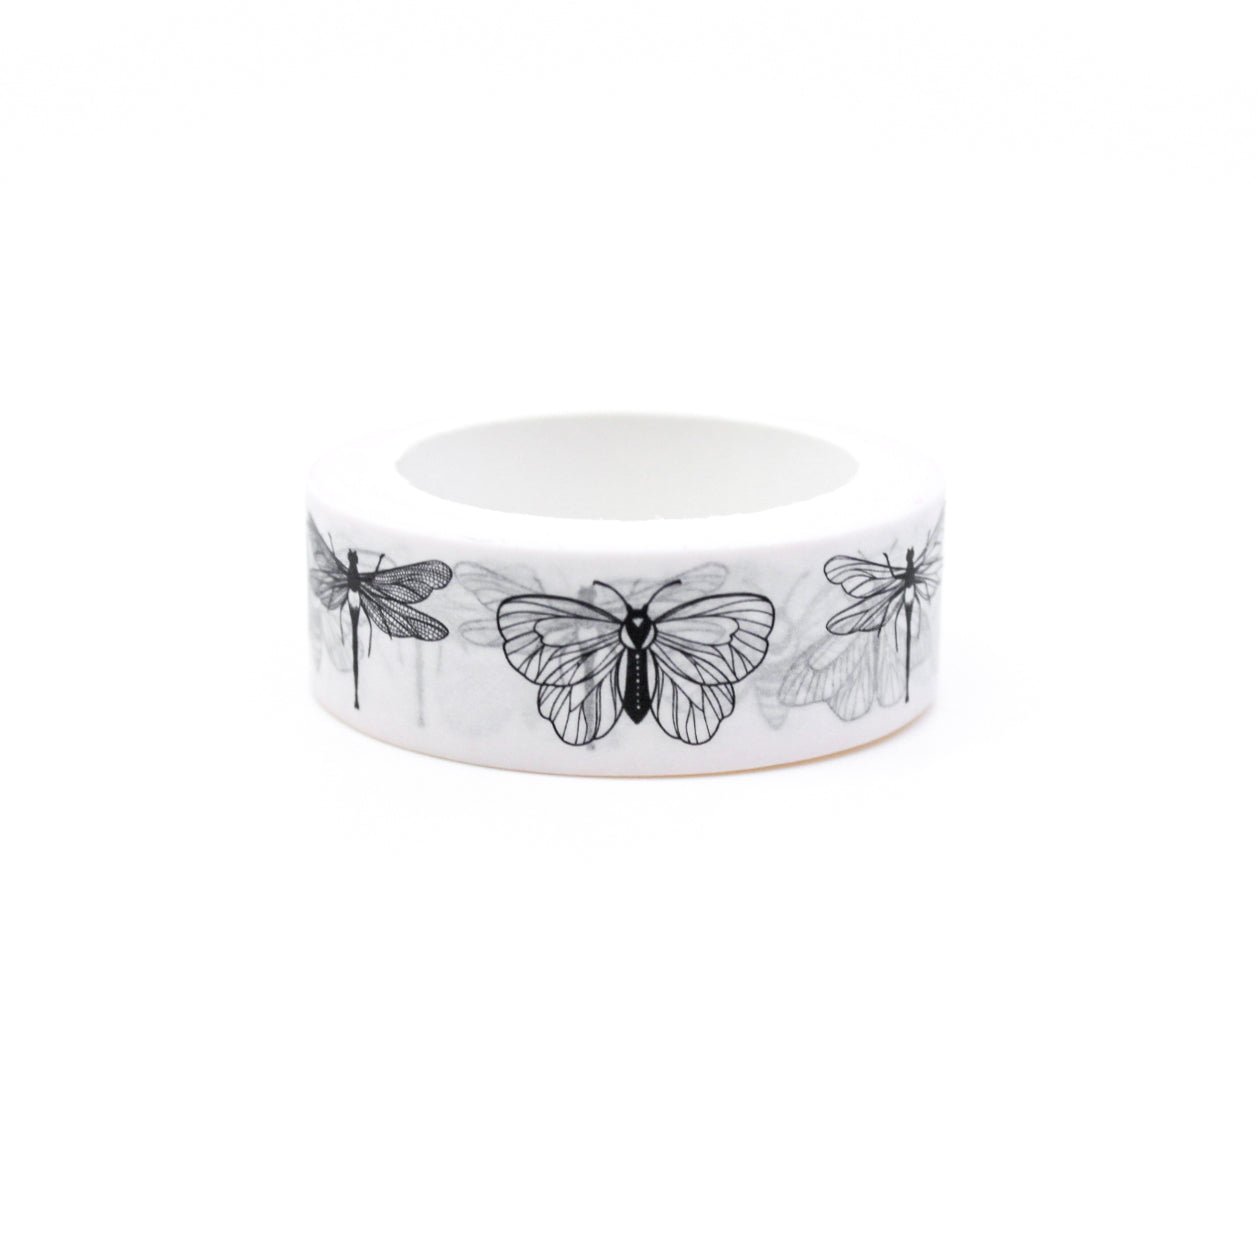 Captivating black and white insect design washi tape featuring moths, butterflies, and dragonflies. Let your creativity take flight as you embrace the allure of these enchanting insects. This tape is sold at BBB Supplies Craft Shop.